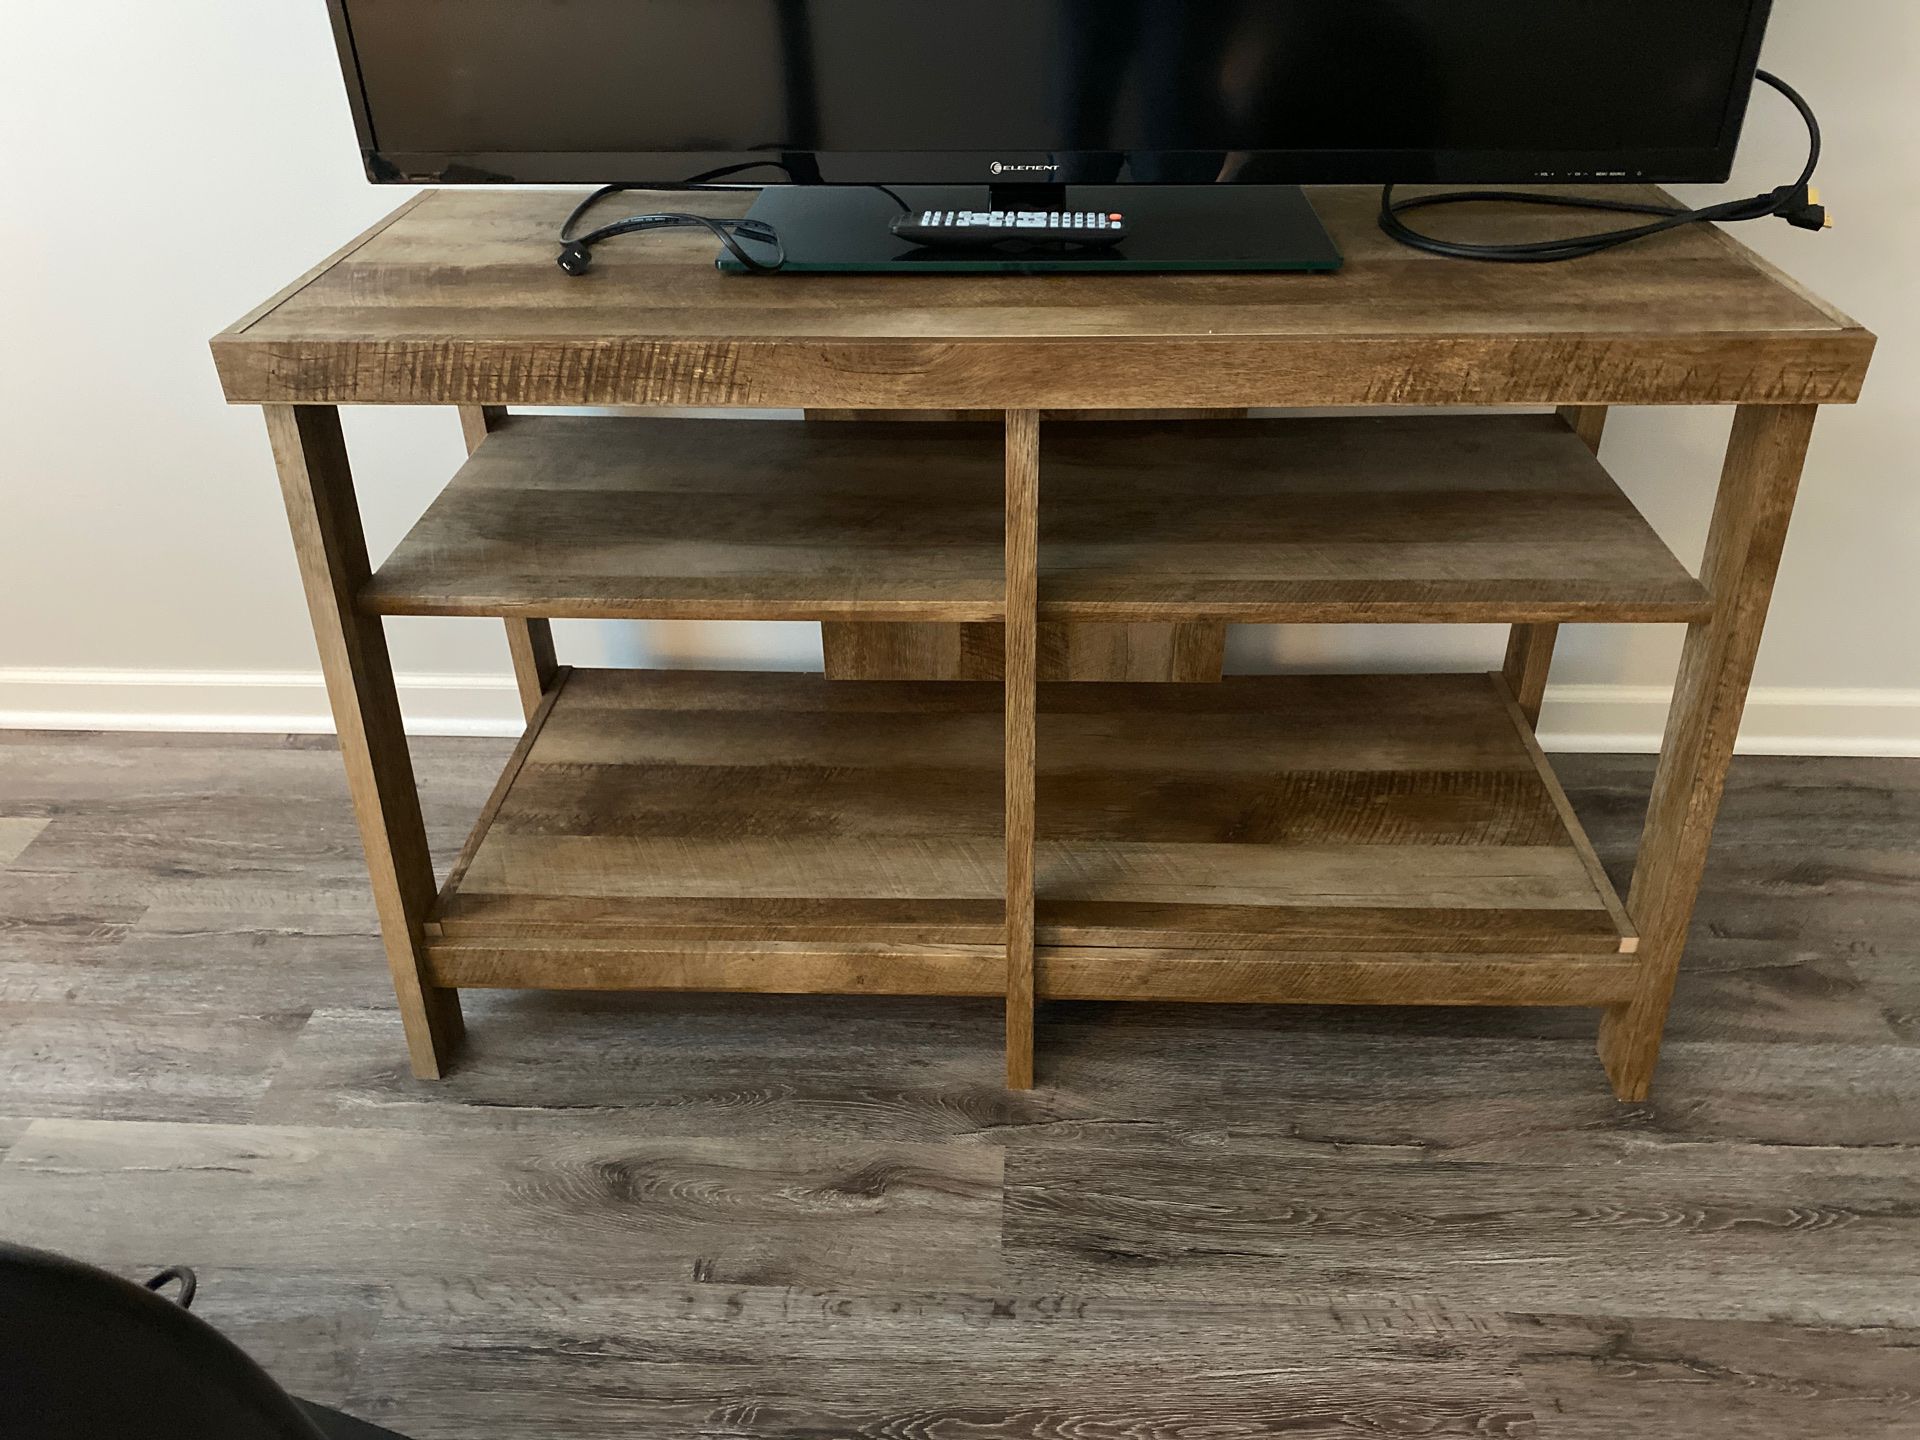 TV Stand, desk, table, furniture